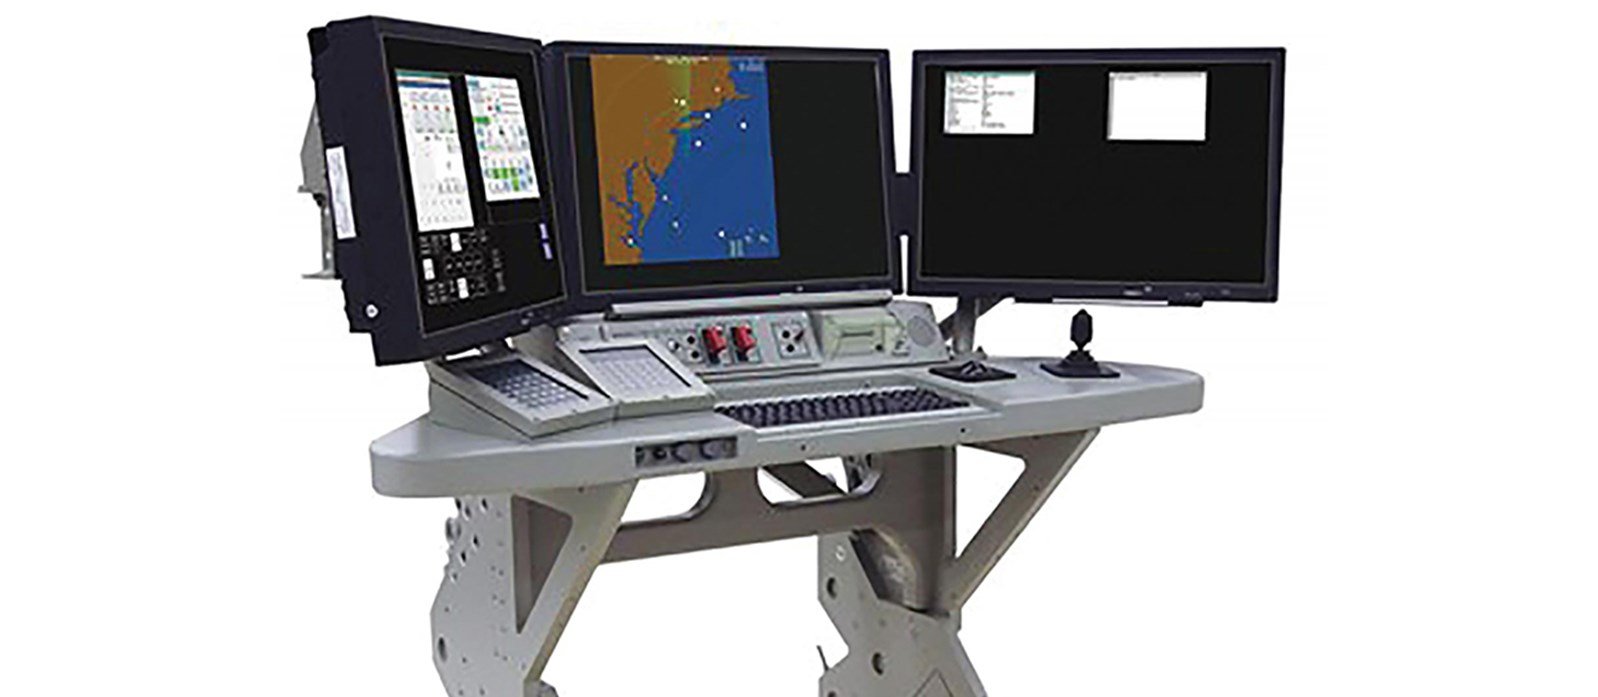 US Navy Advanced Consoles and Displays